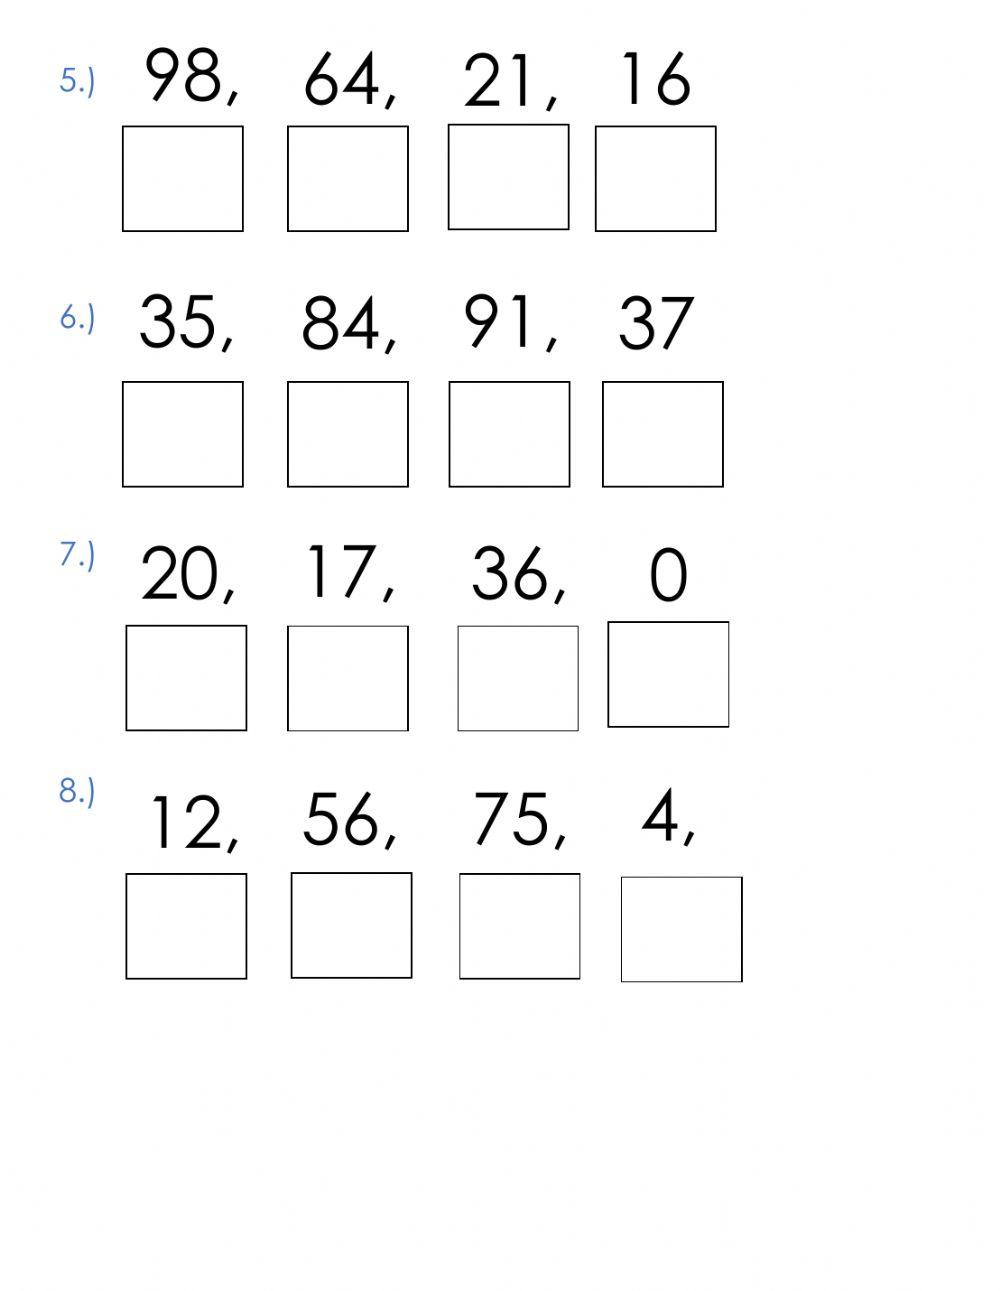 Arranging Numbers from Biggest to Smallest